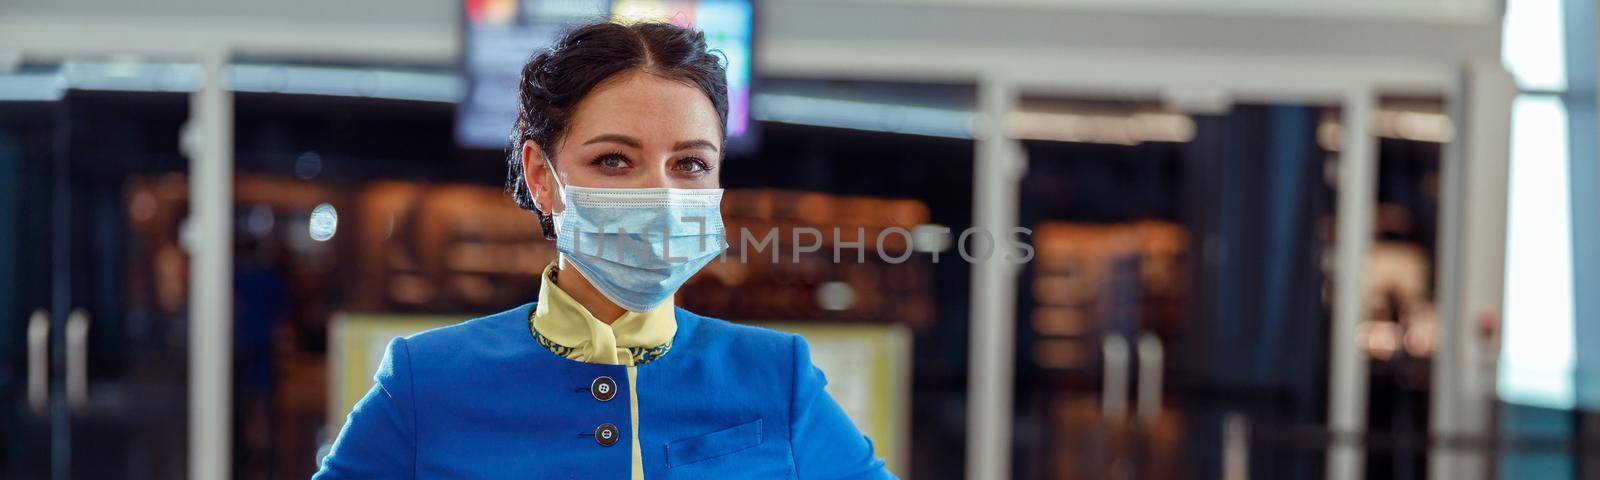 Female flight attendant wearing protective face mask and air hostess uniform while standing at airport during pandemic